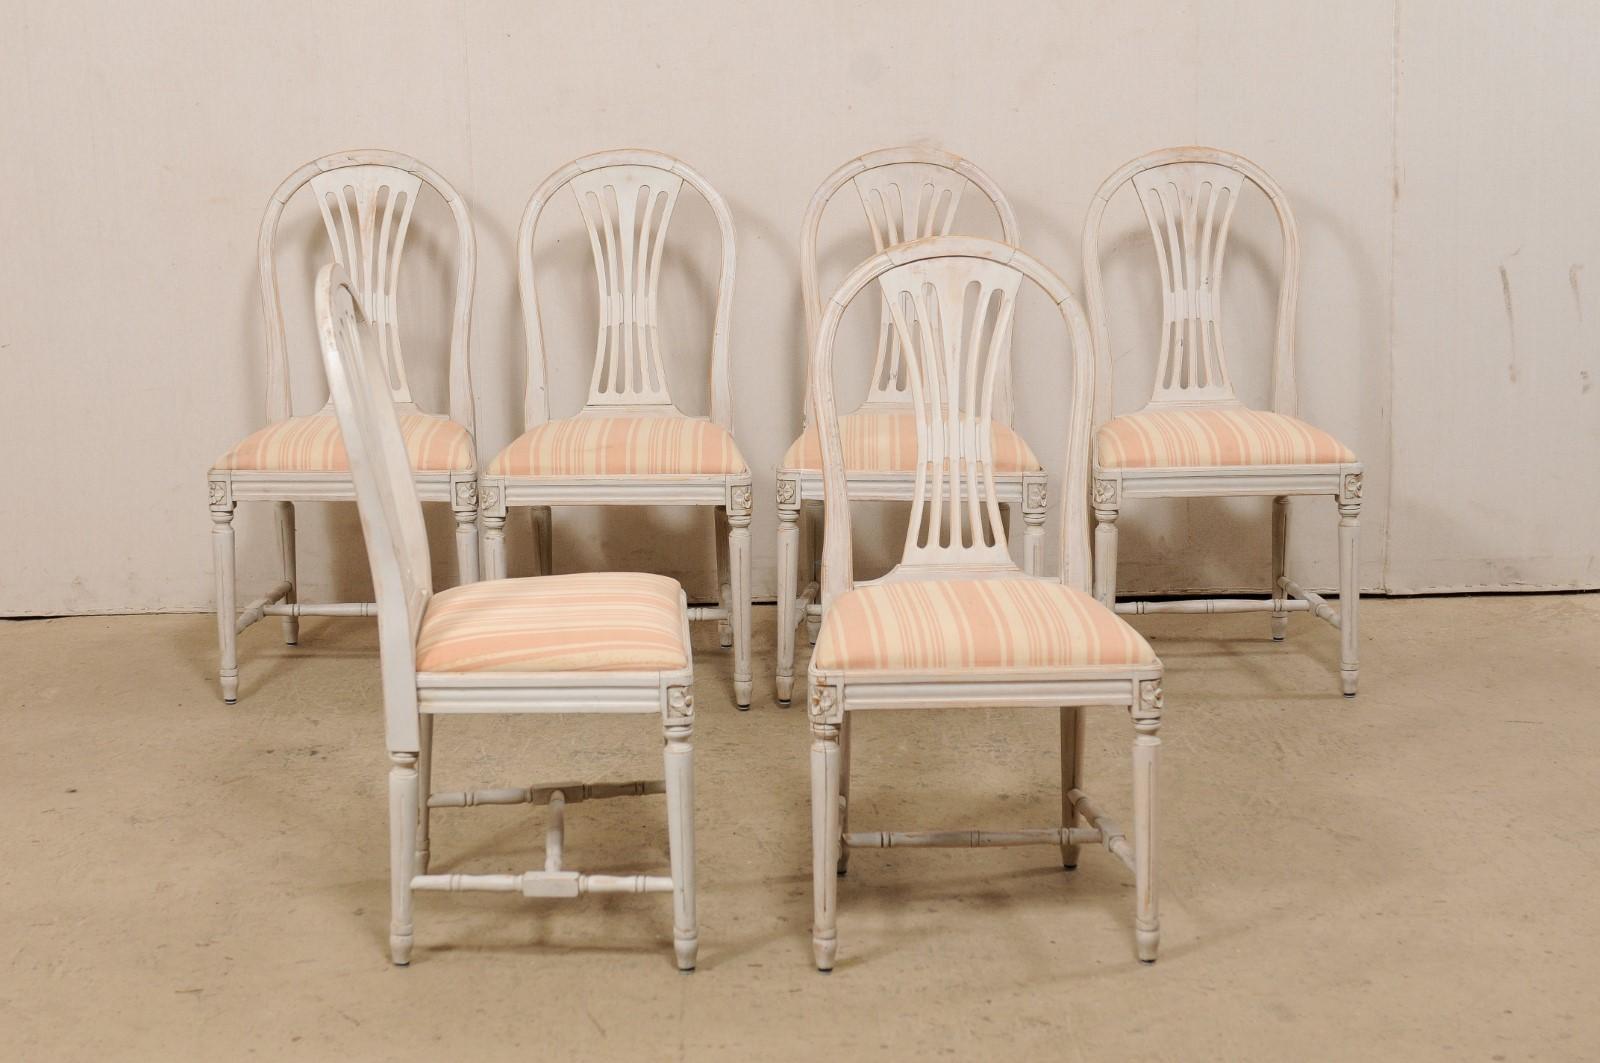 A Swedish set of six carved-wood side side chairs, with upholstered seats, circa 1960's. This set of vintage chairs from Sweden each feature gracefully round chair backs with pierce-carved splat backrests, molded trim aprons with rounded front